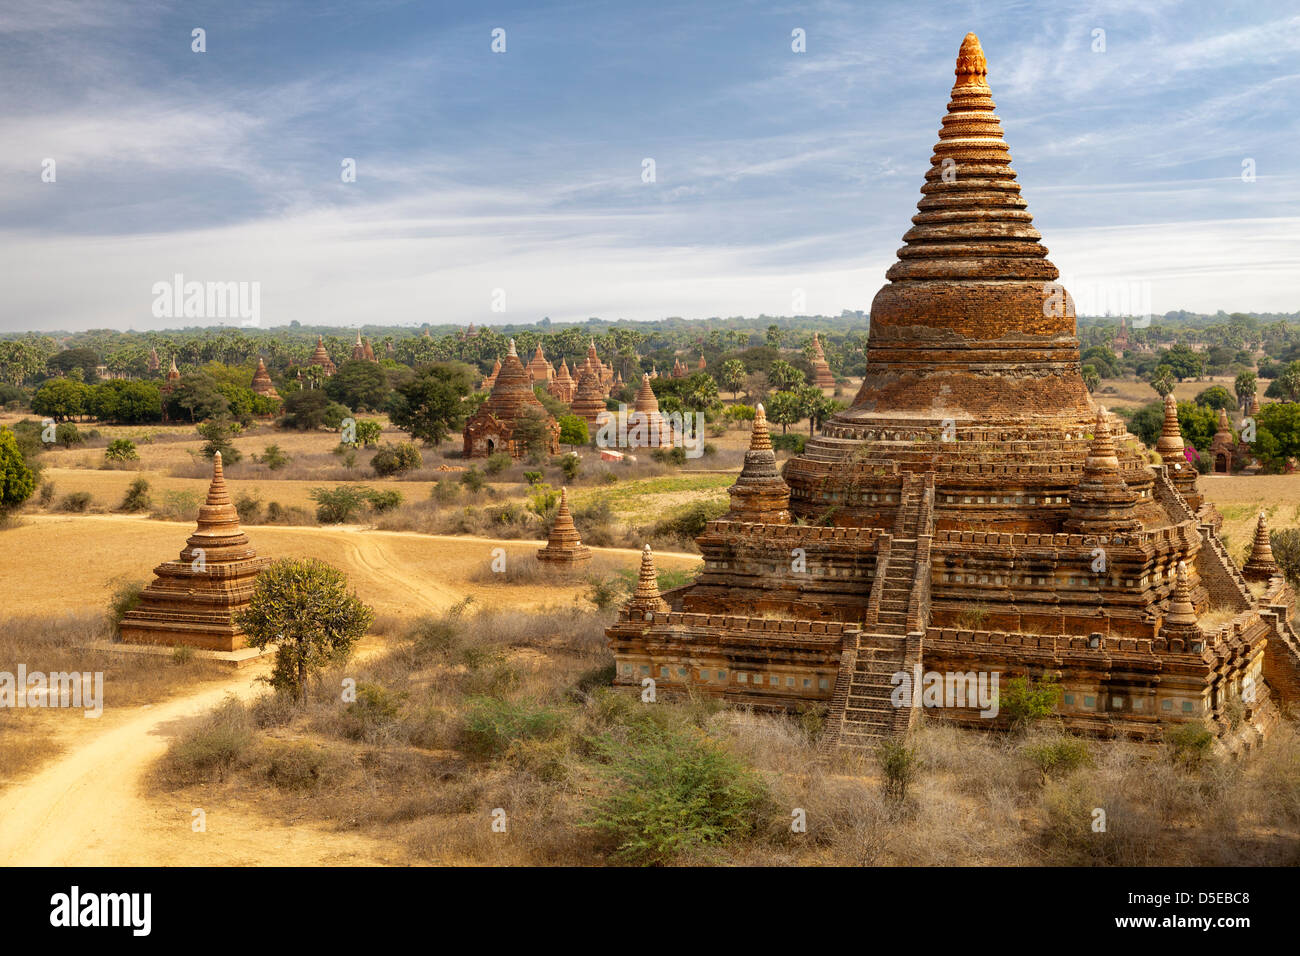 The Temples and Pagodas of Bagan, Myanmar - early morning 2 Stock Photo